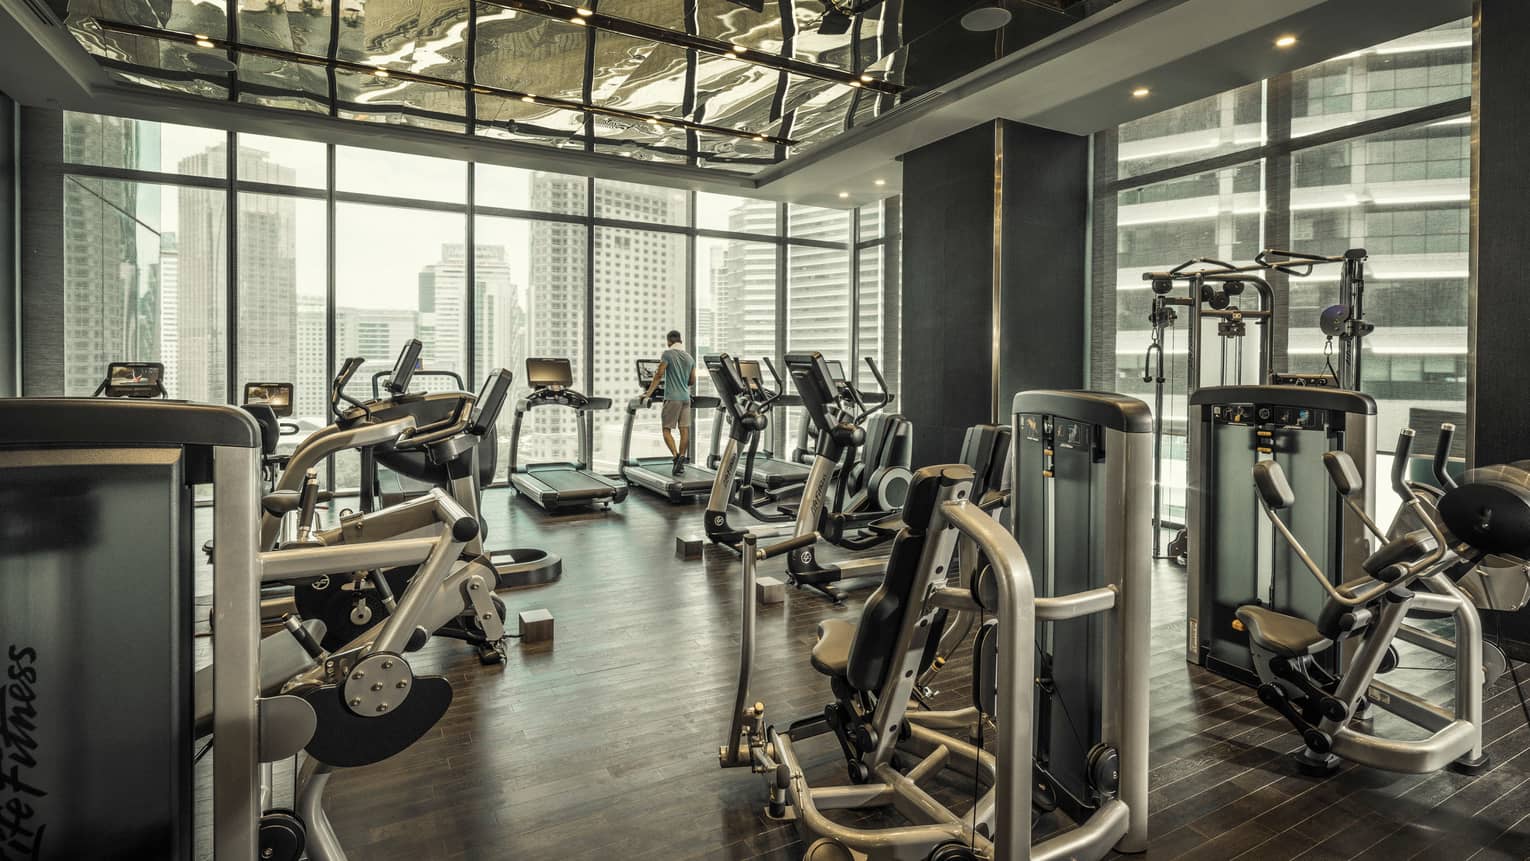 Fitness centre that looks out on the city skyline